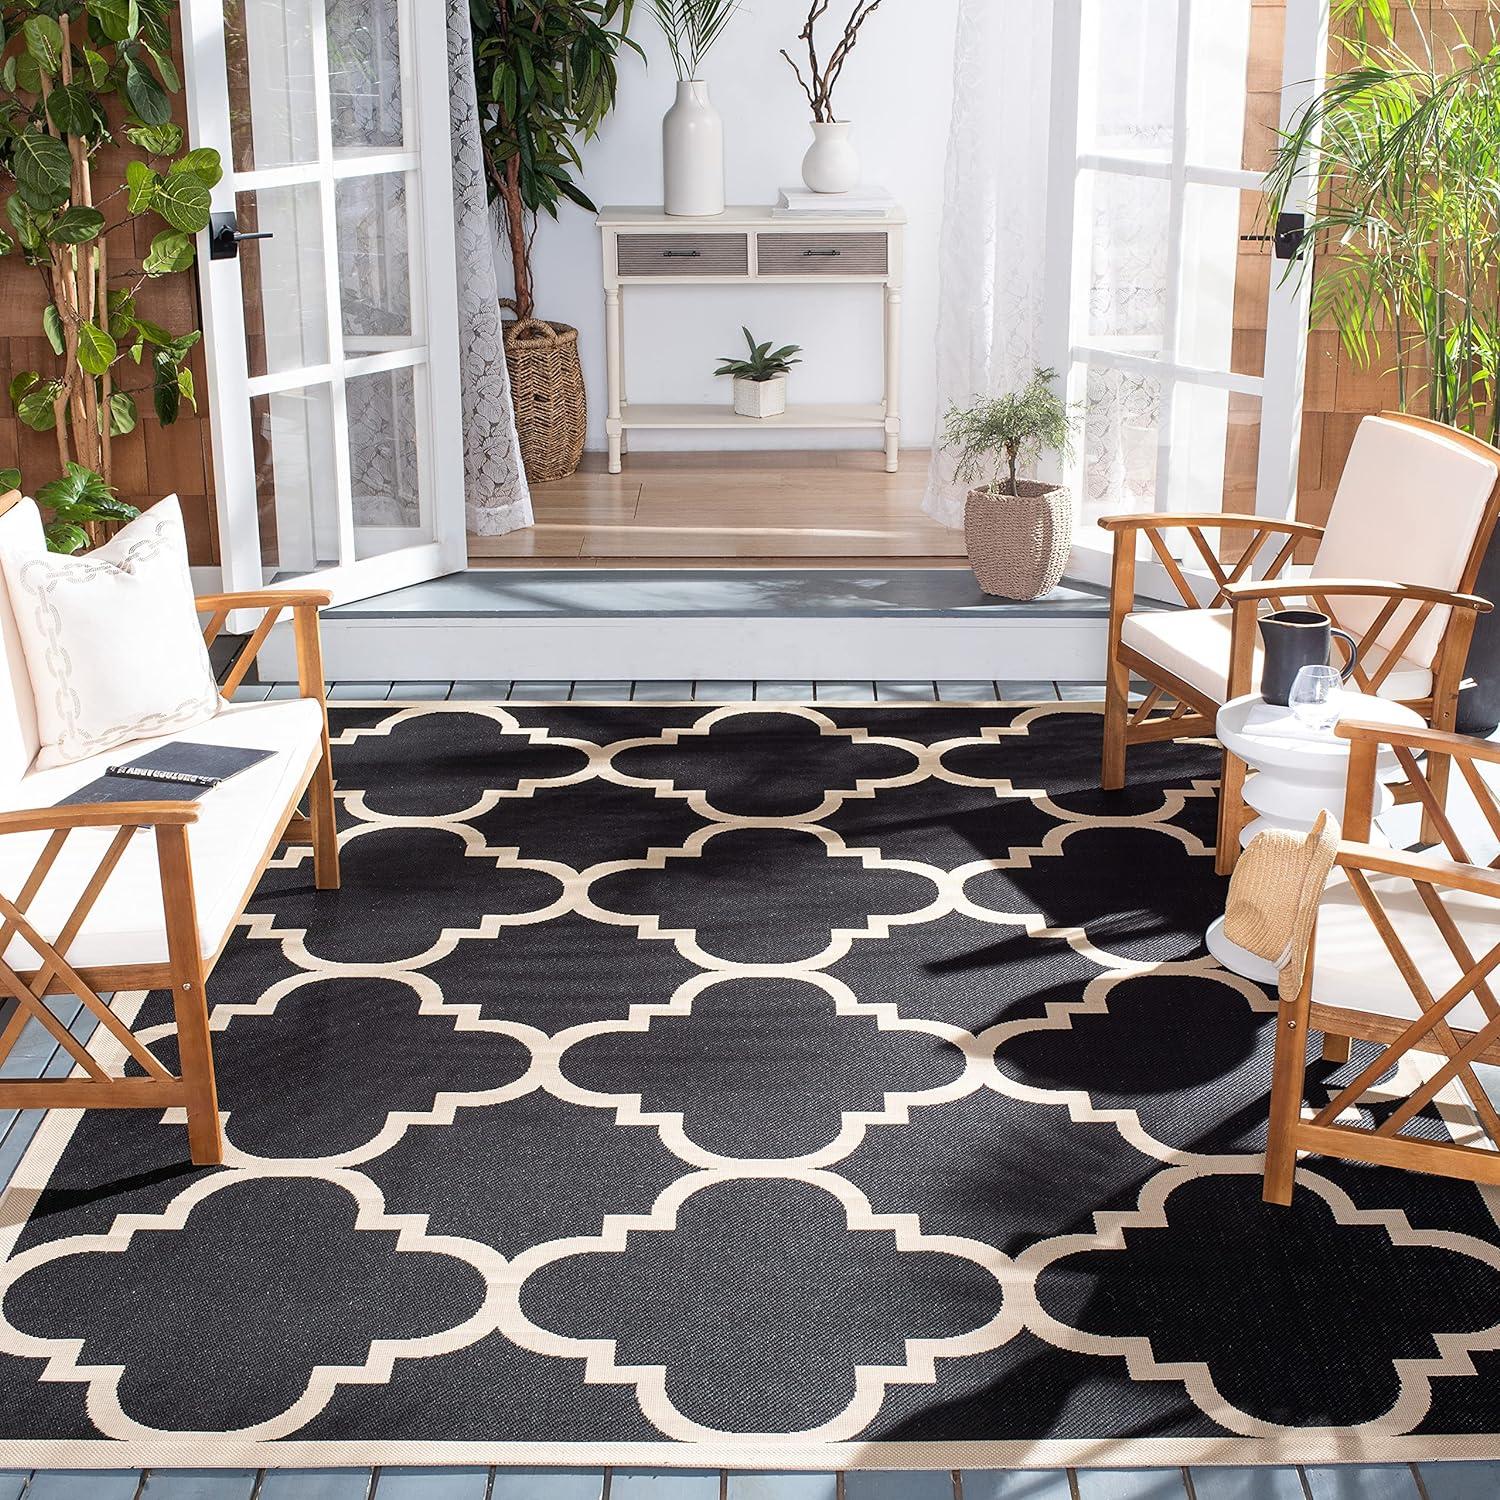 Courtyard Chic Black and Beige 5'3" Square Indoor/Outdoor Area Rug